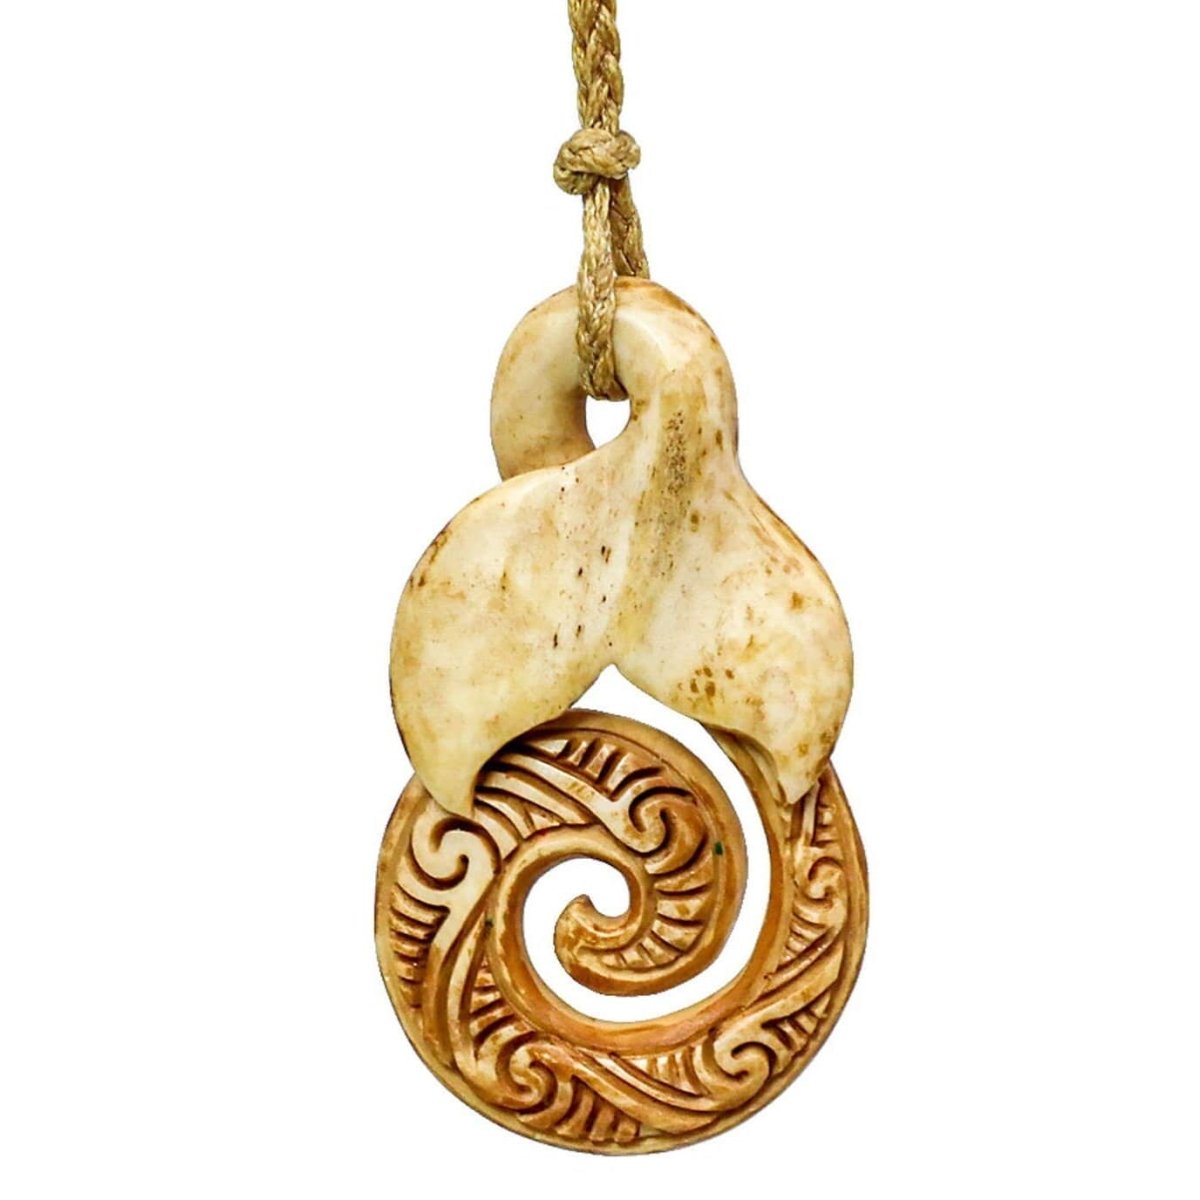 New Zealand Maori Inspired Bone, Infinity Spiral Stylized Whale Tail Necklace - Earthbound Pacific